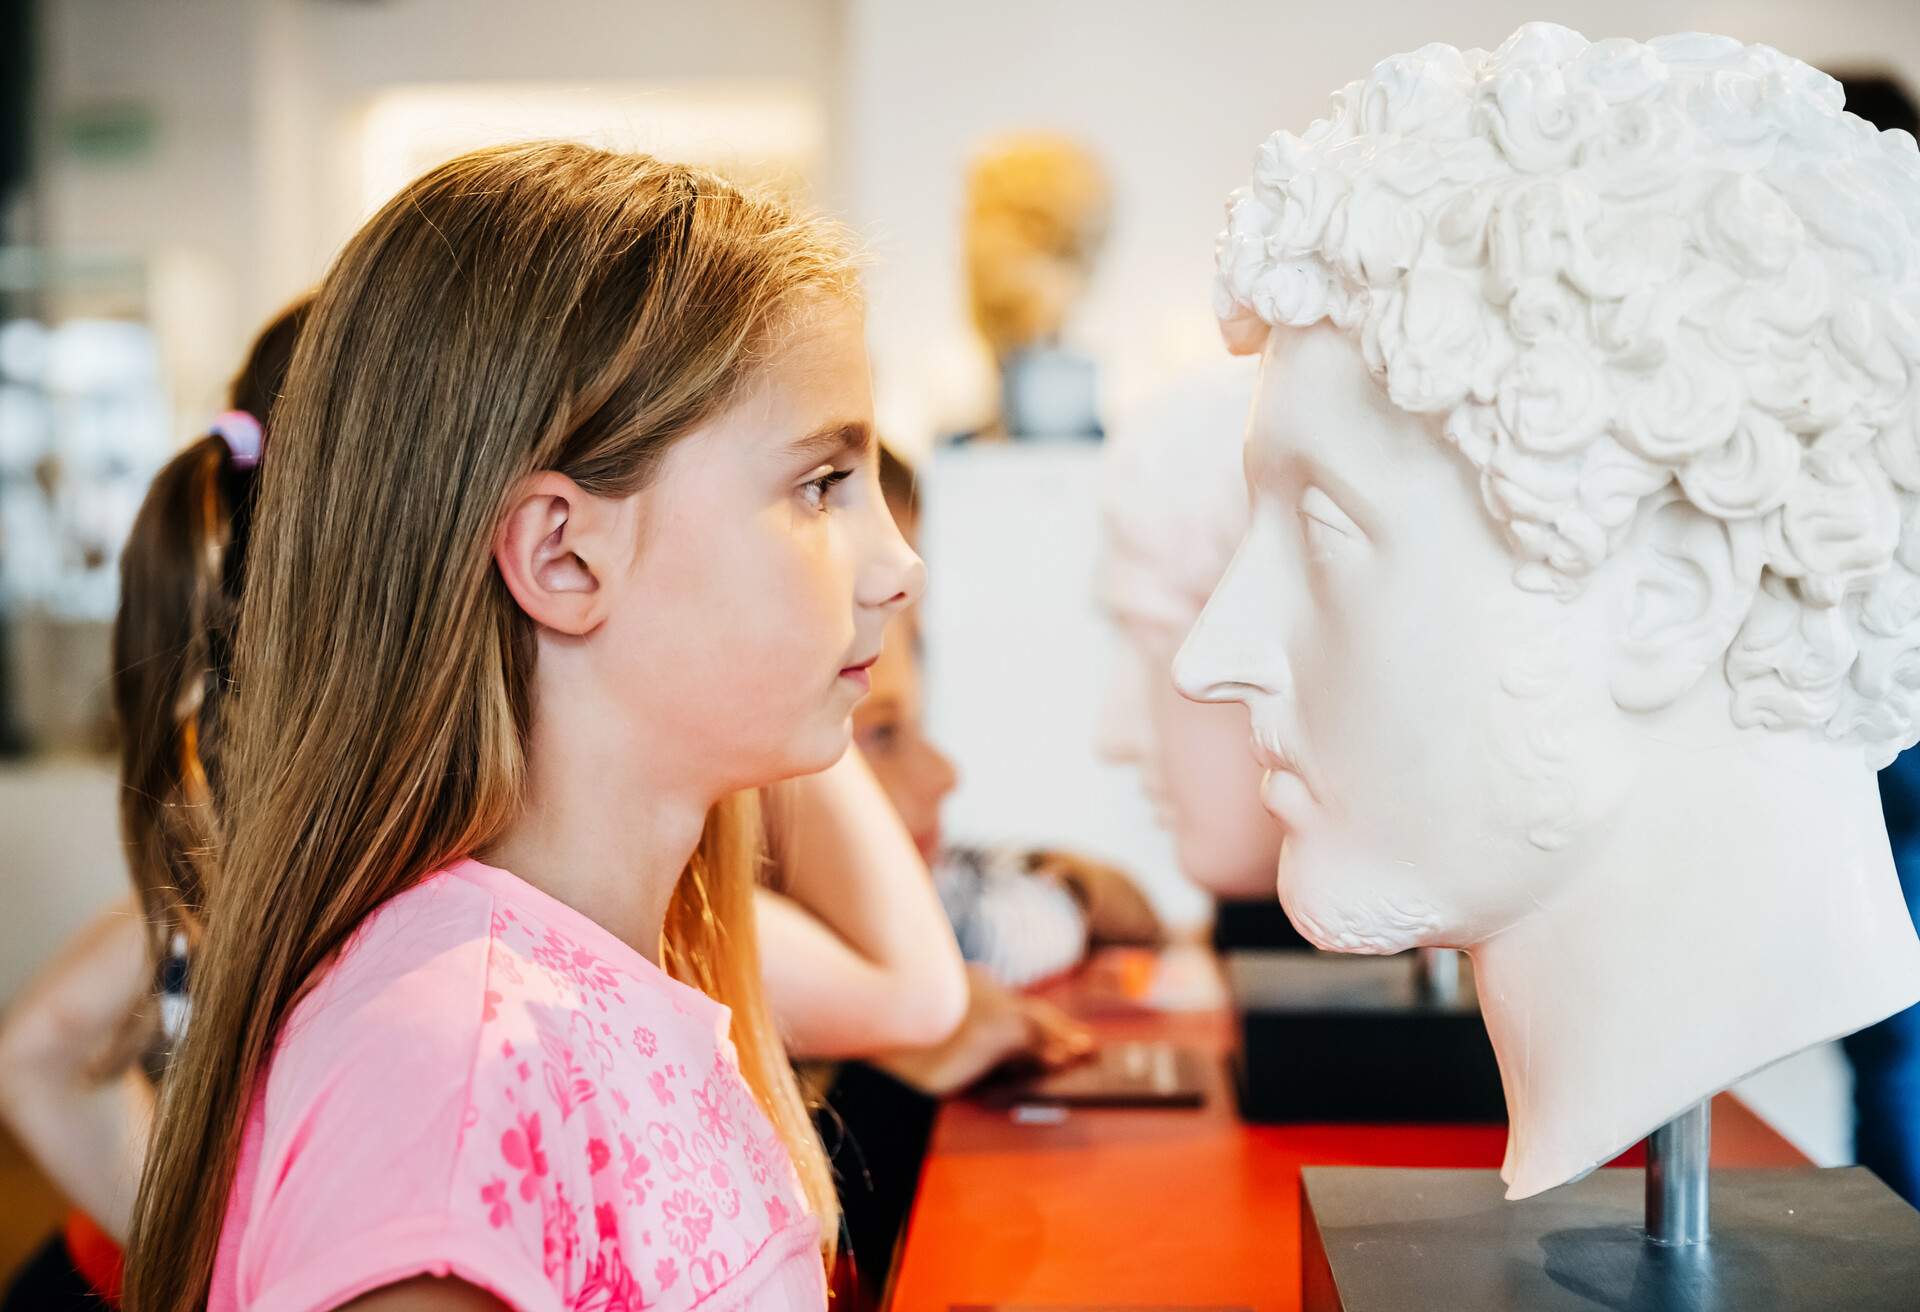 A young girl looking closely at a classical bust while in a museum on a field trip with her classmates.